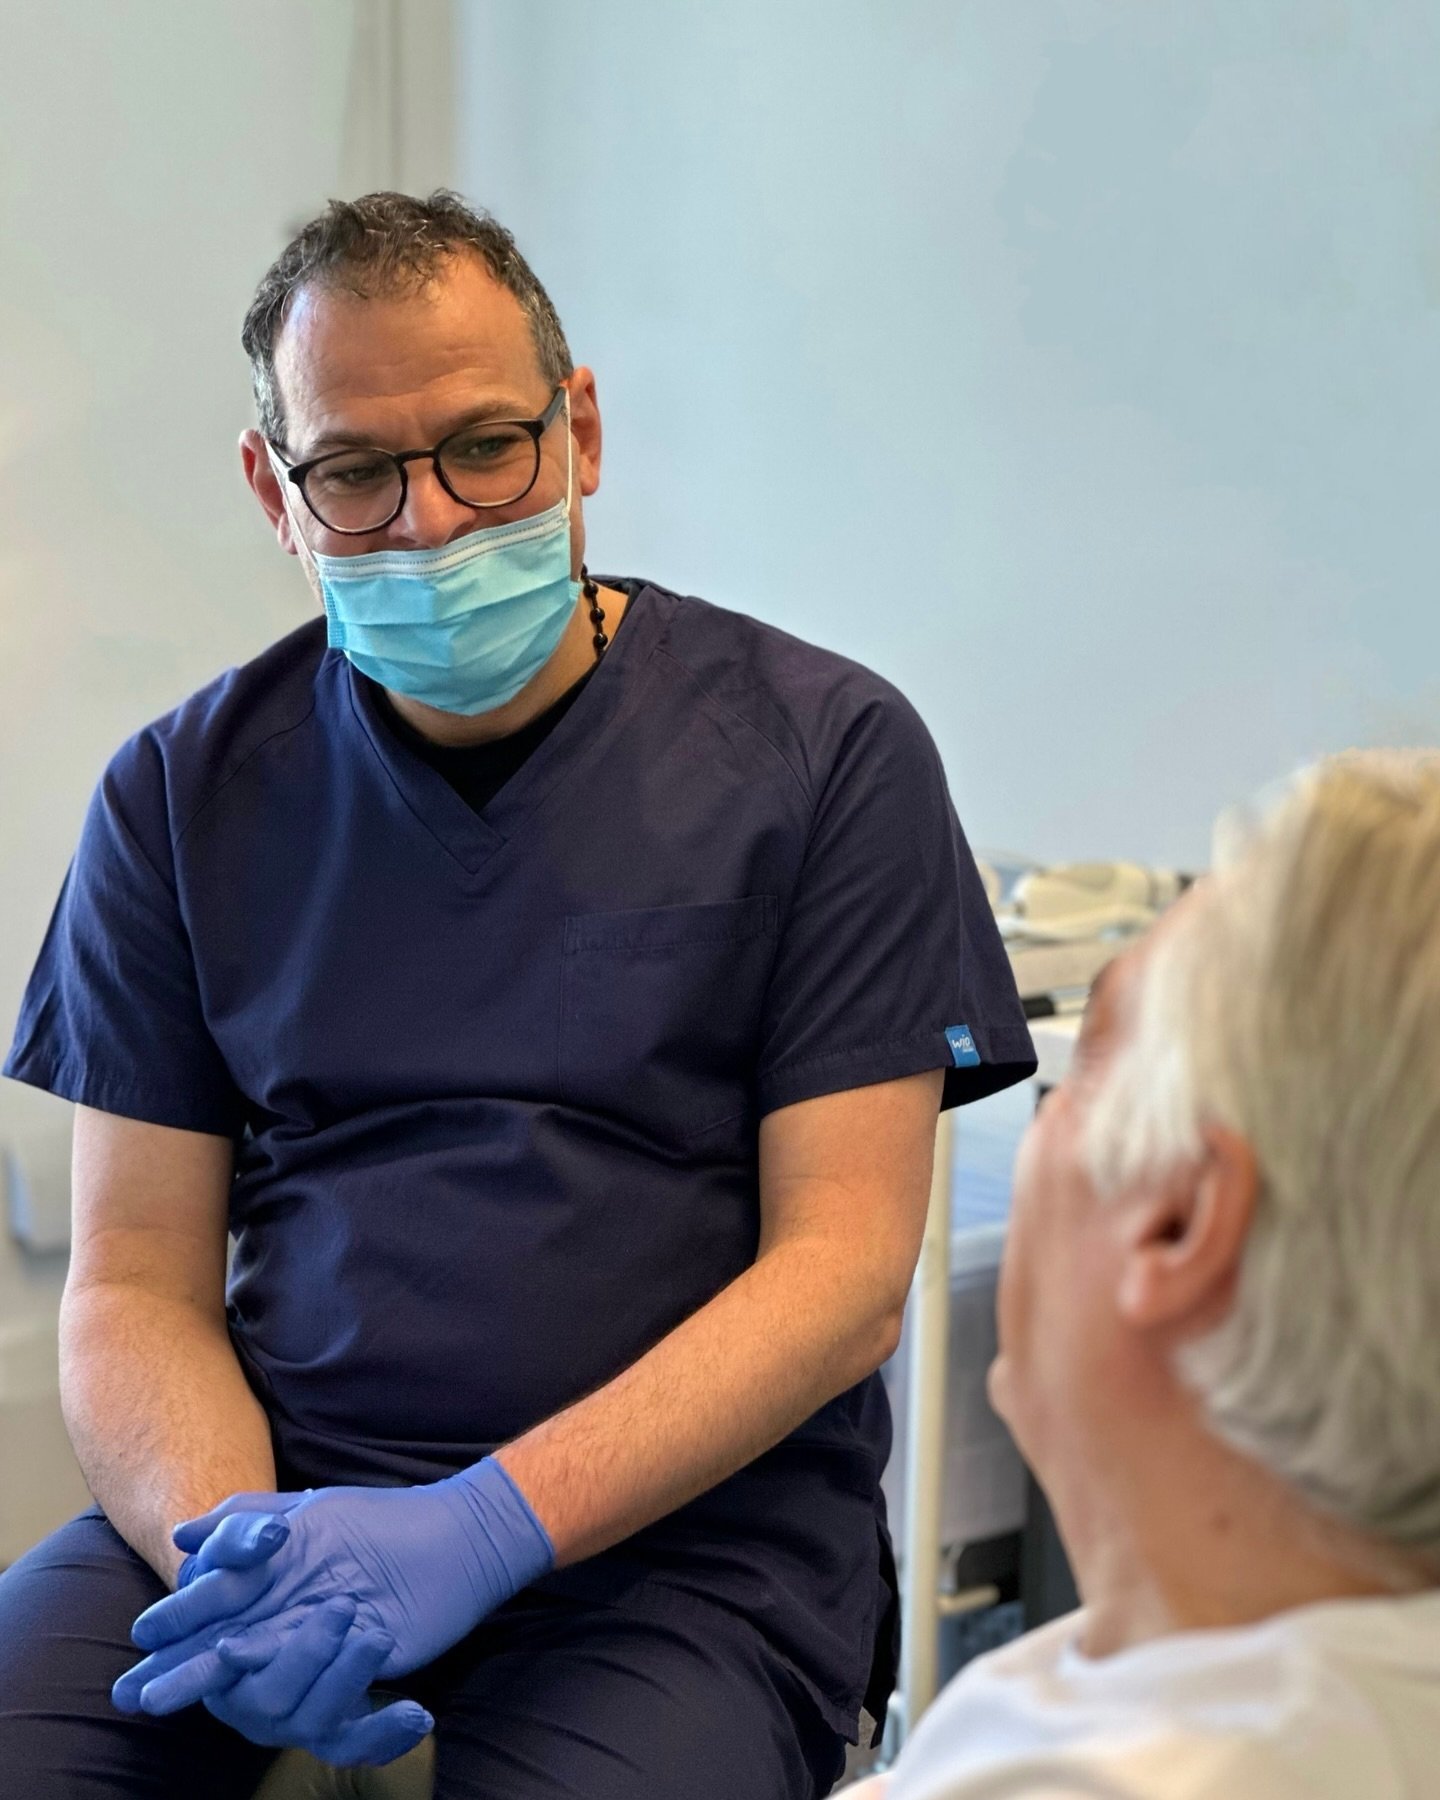 Our fantastic implantologist, Samo, working hard in the clinic today! Crafting confident smiles, one implant at a time. 😁✨